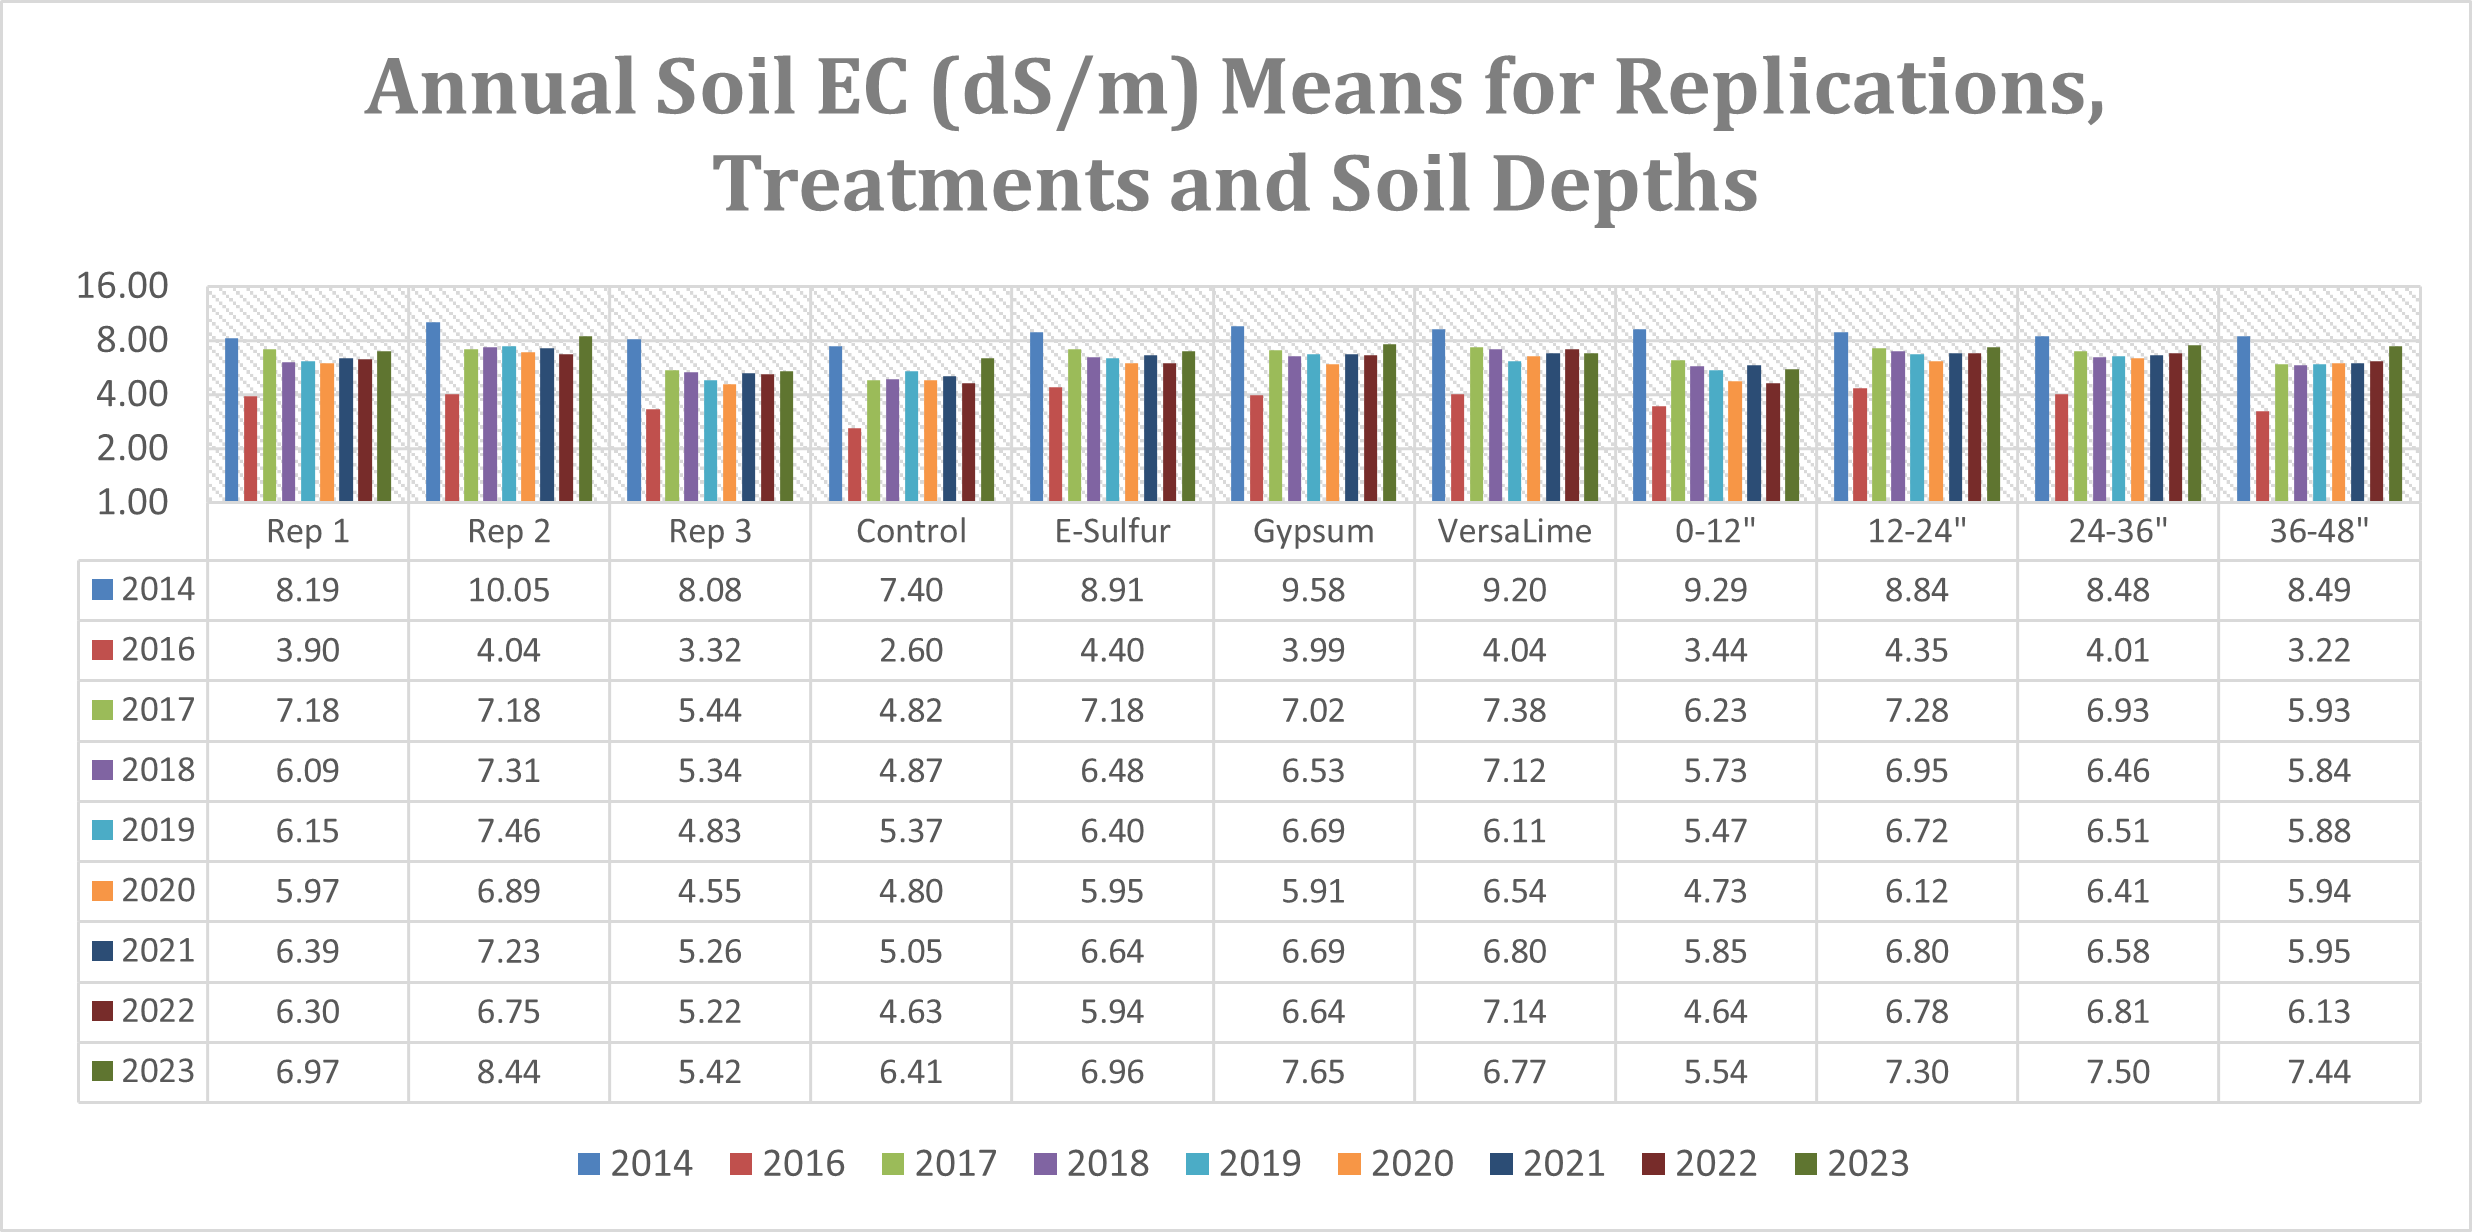 Annual soil EC (dS/m) means for replications, treatments and soil depths 2023